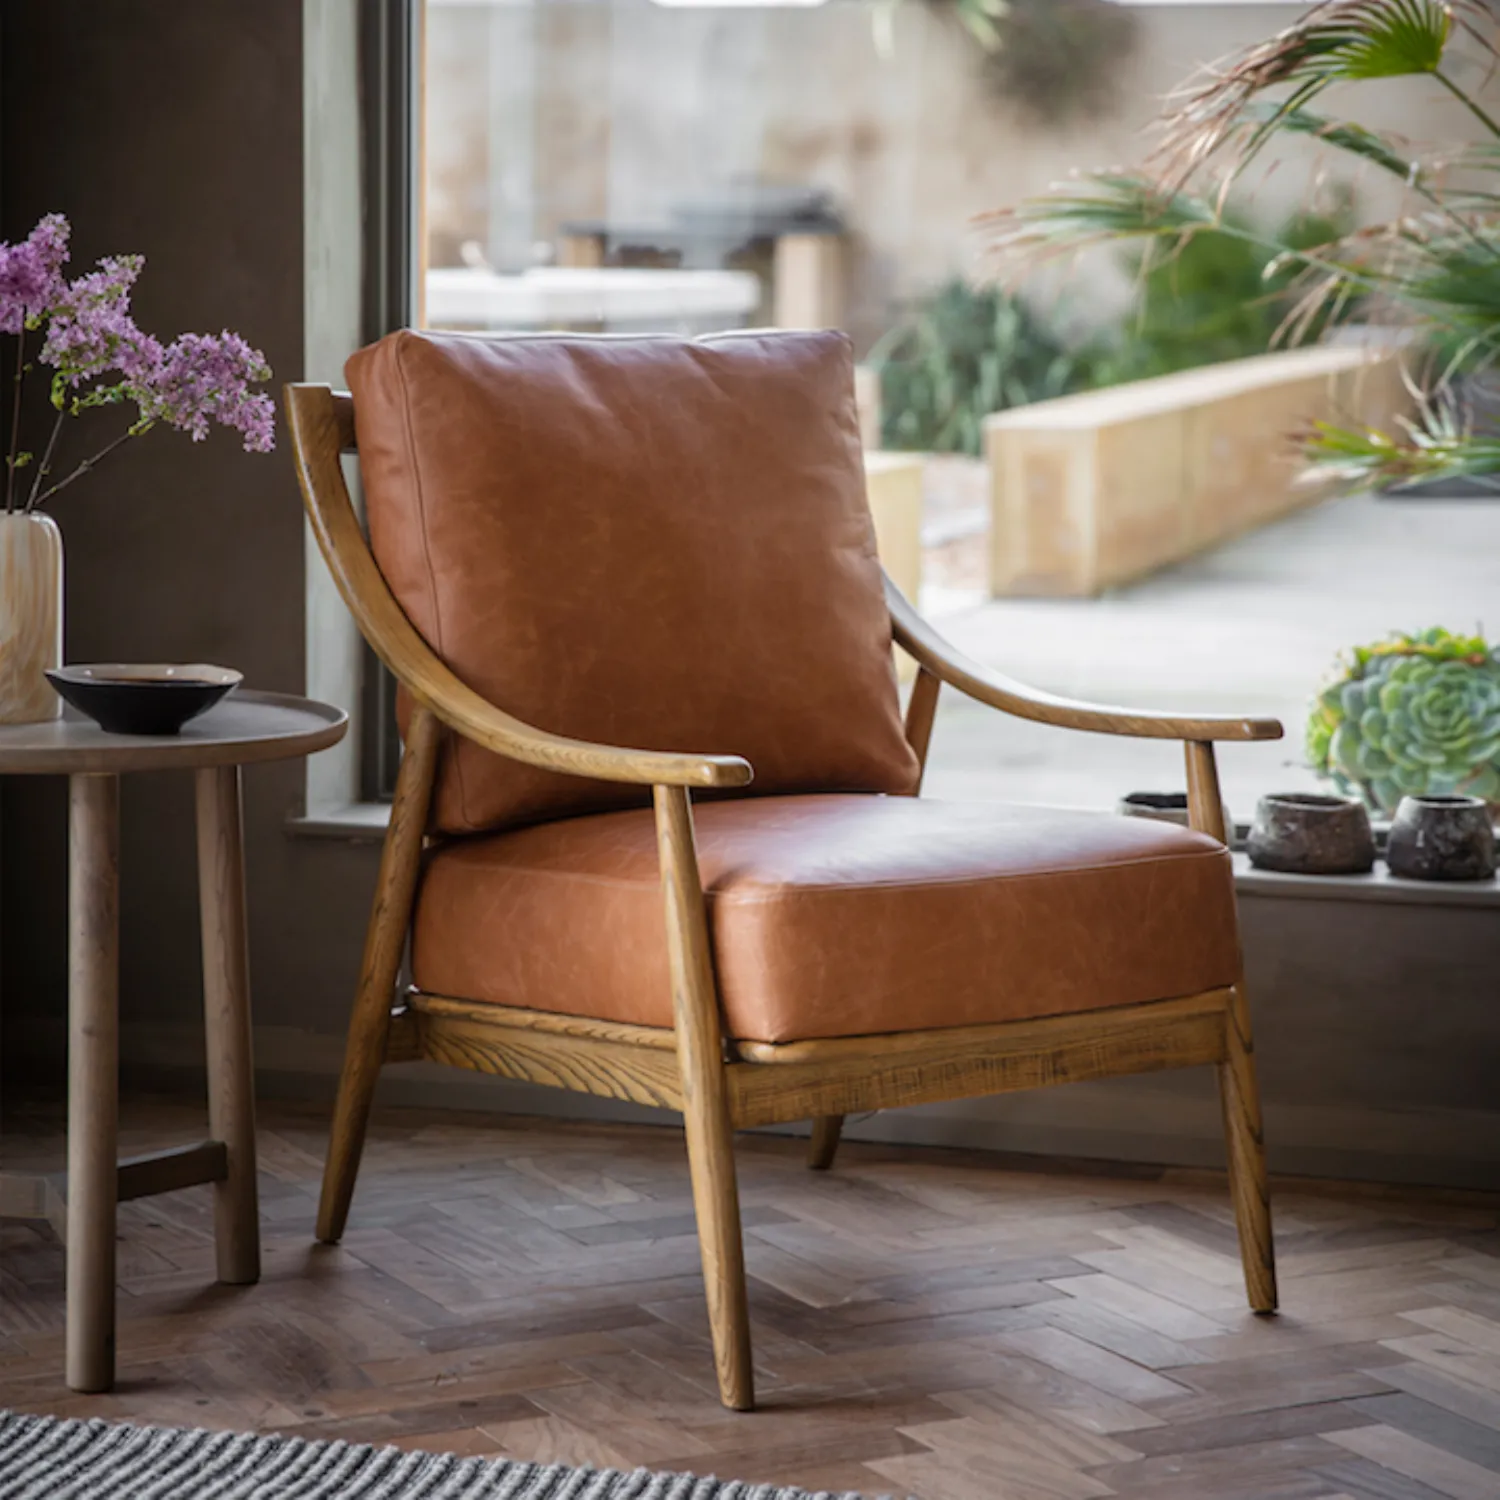 Tan Brown Leather Armchair Oak Arms and Frame